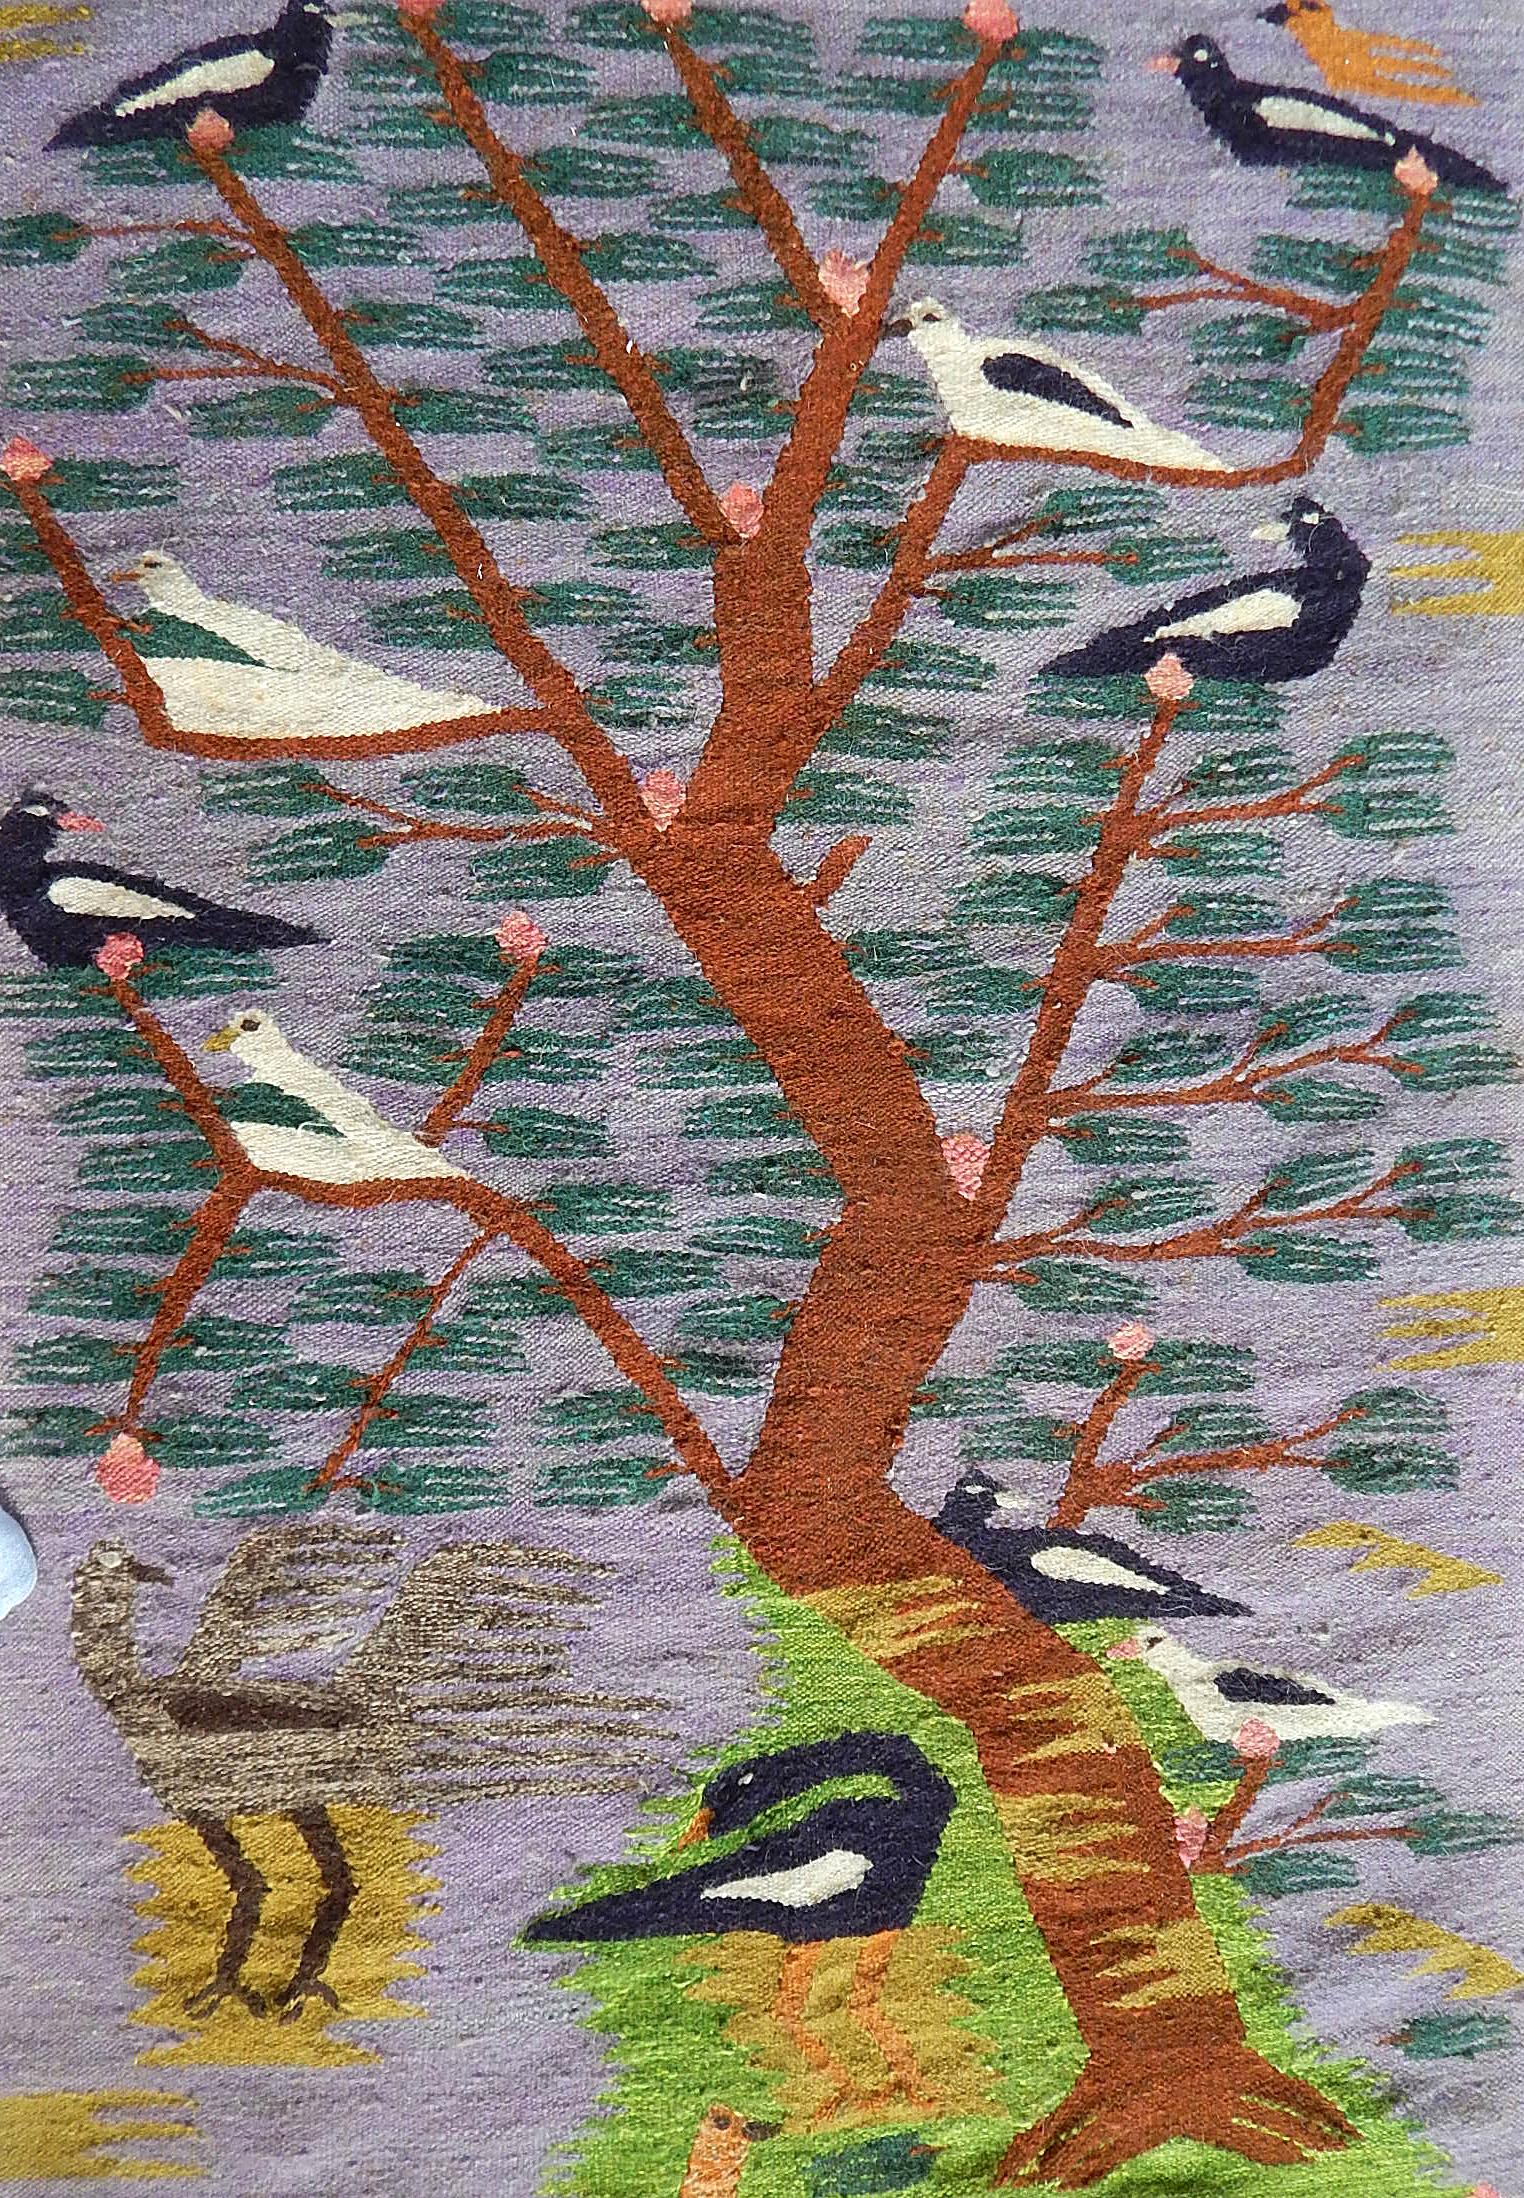 This remarkable weaving, using yarns in shades of pale purple, burnt umber, ruddy brown and deep blue, is a masterpiece of post-war Egyptian artisanry. It depicts a crowd of birds in and around a stylized tree and was influenced by the work of the